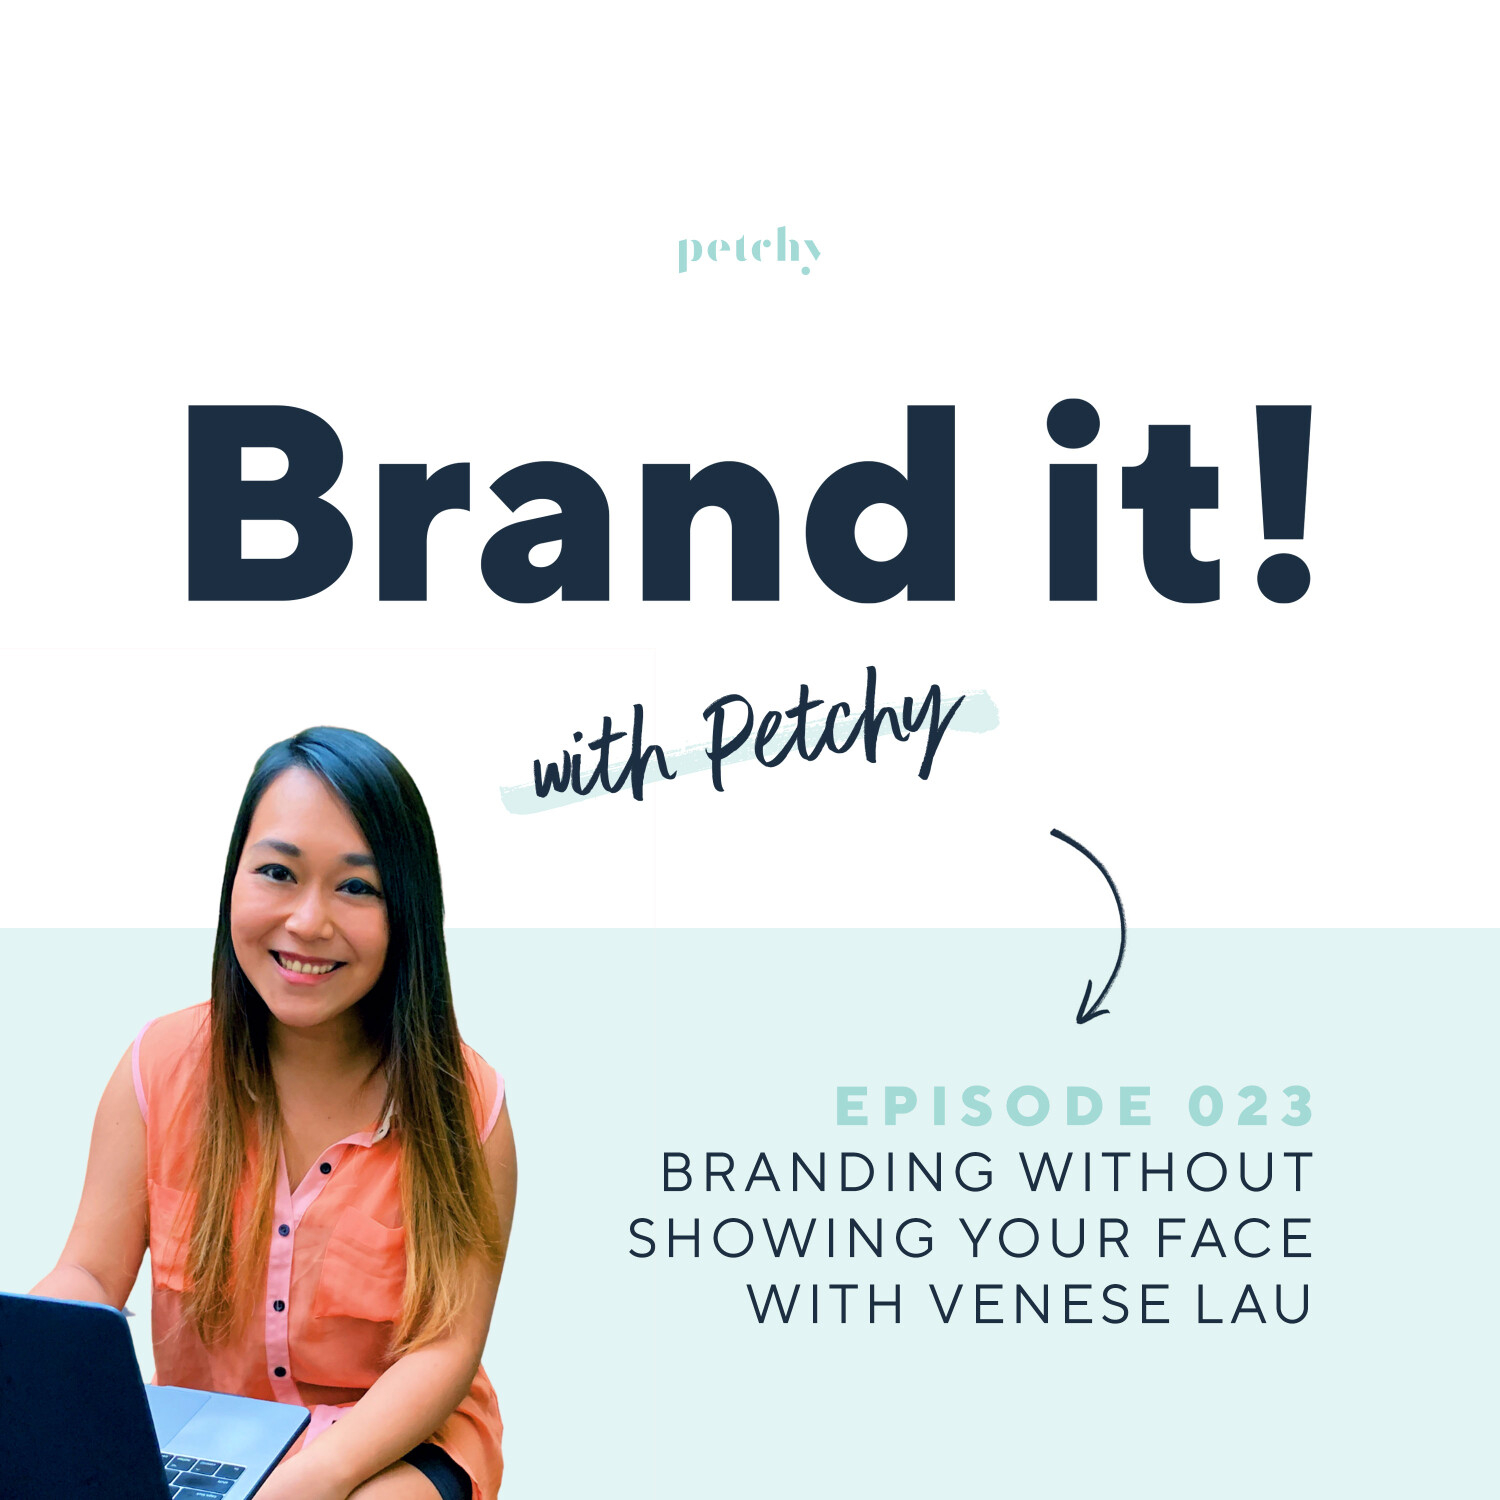 Branding without showing your face w/ Venese Lau